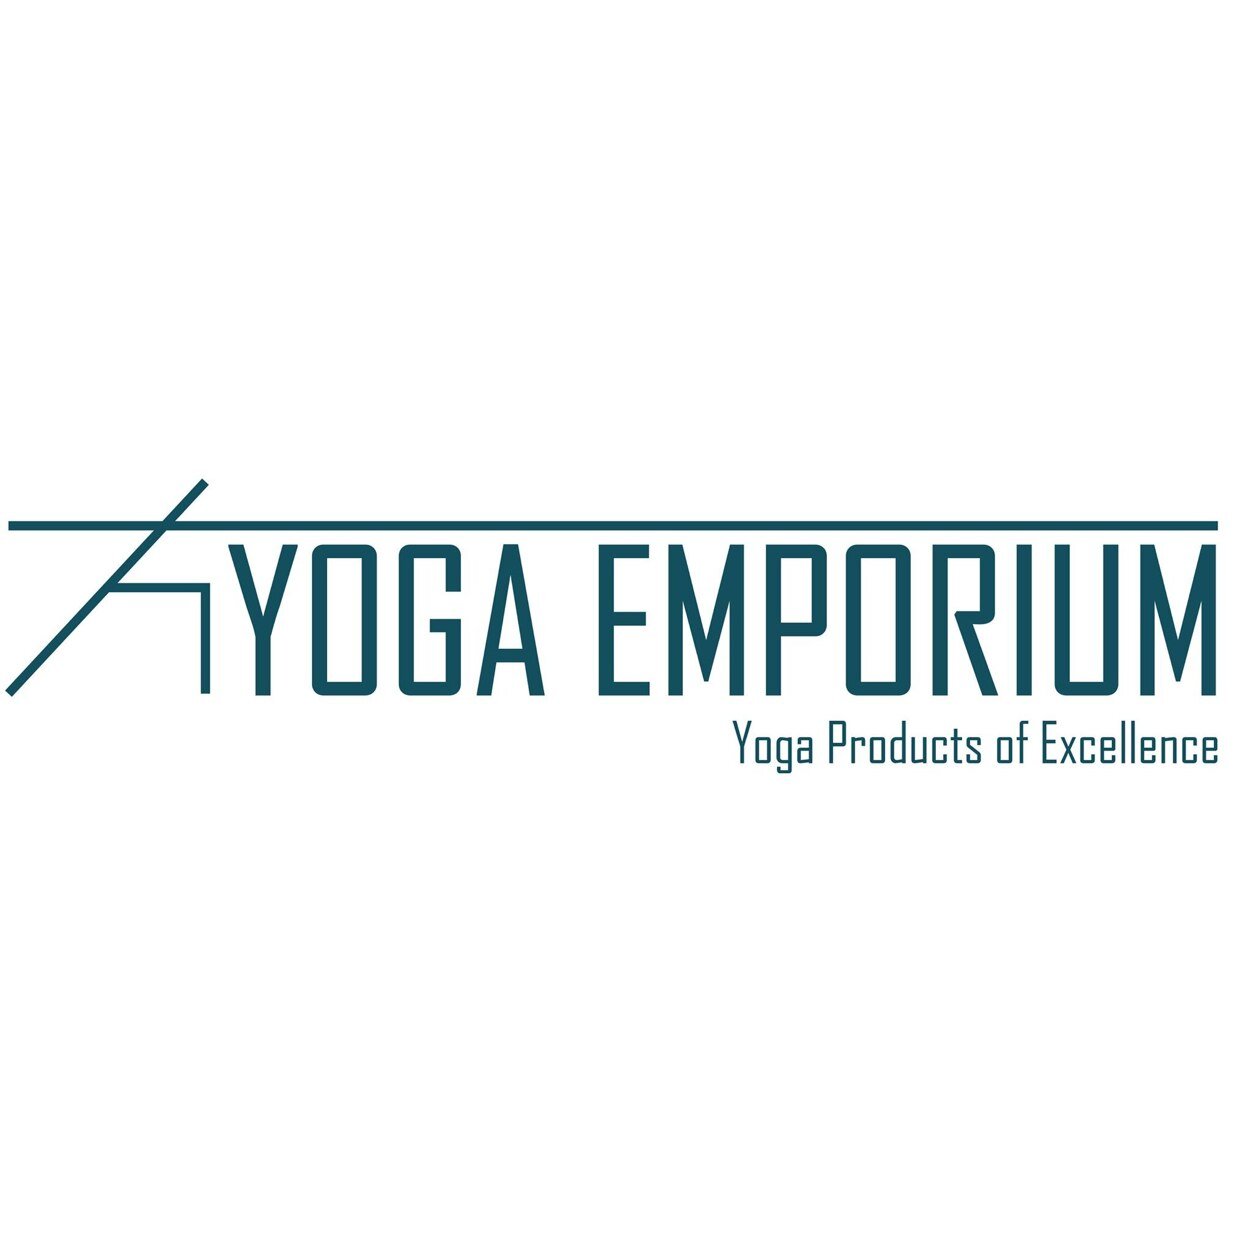 UK-based online retail yoga shop offering an eclectic mix of the highest quality yoga gear and the latest yoga fashions on the market. http://t.co/r6sbtqMP0J